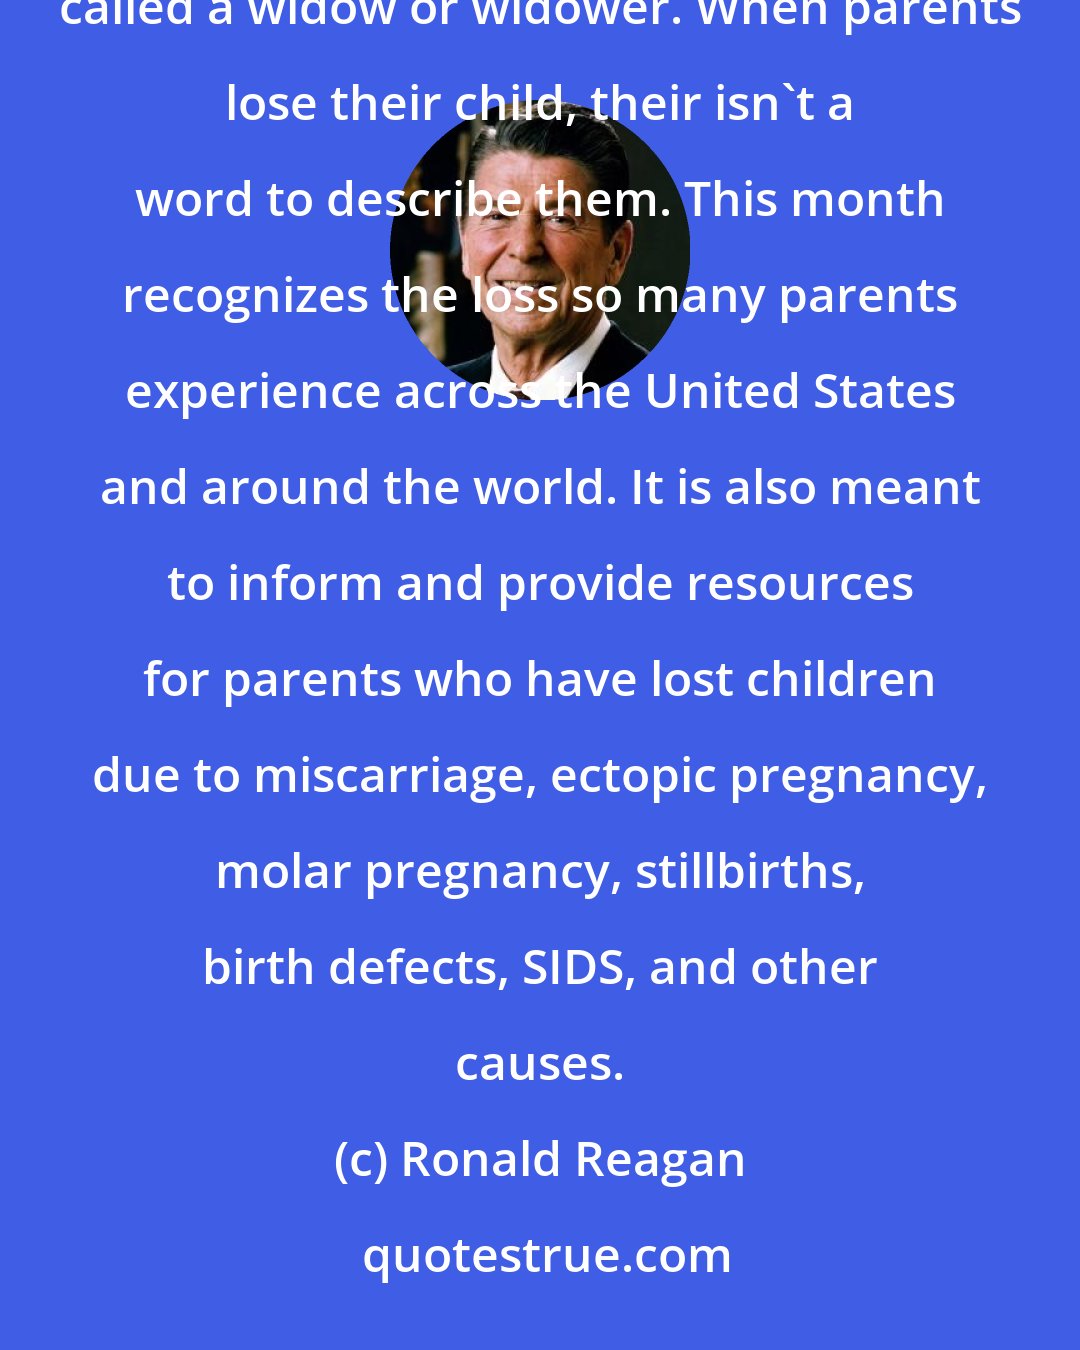 Ronald Reagan: When a child loses his parent, they are called an orphan. When a spouse loses her or his partner, they are called a widow or widower. When parents lose their child, their isn't a word to describe them. This month recognizes the loss so many parents experience across the United States and around the world. It is also meant to inform and provide resources for parents who have lost children due to miscarriage, ectopic pregnancy, molar pregnancy, stillbirths, birth defects, SIDS, and other causes.